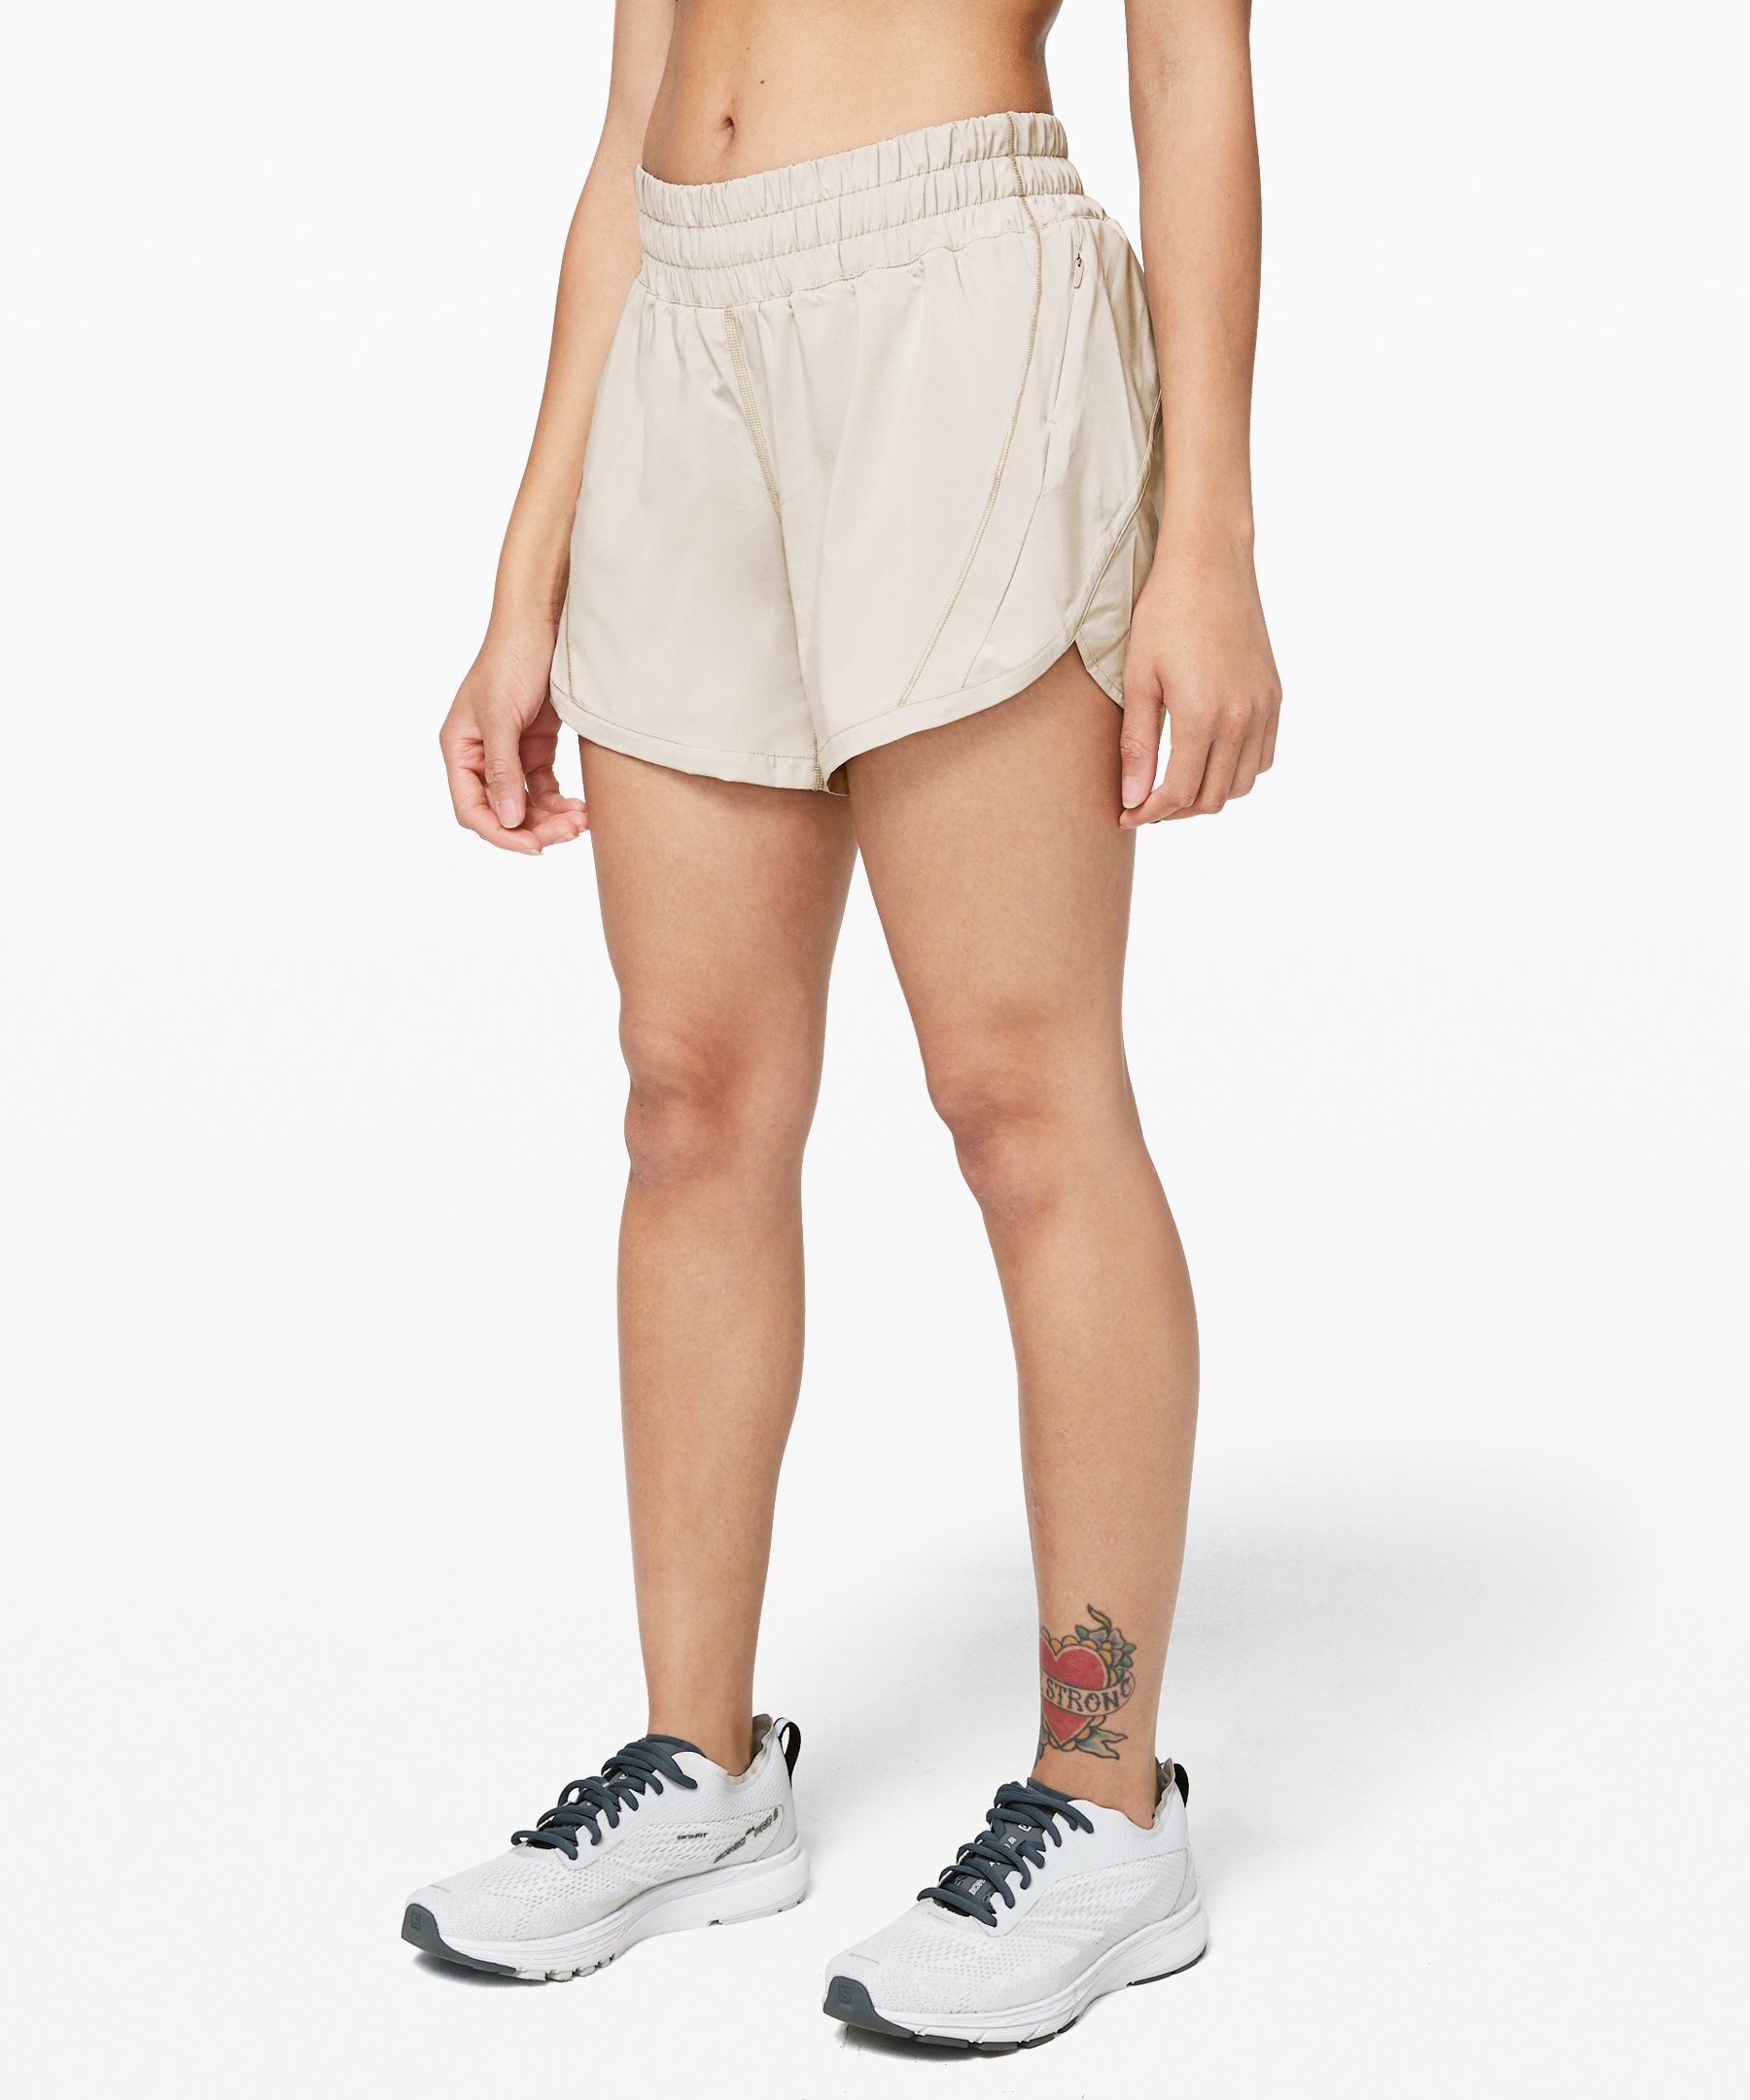 LULULEMON SHORT TRY ON REVIEW / TRACK THAT MID-RISE LINED SHORT 